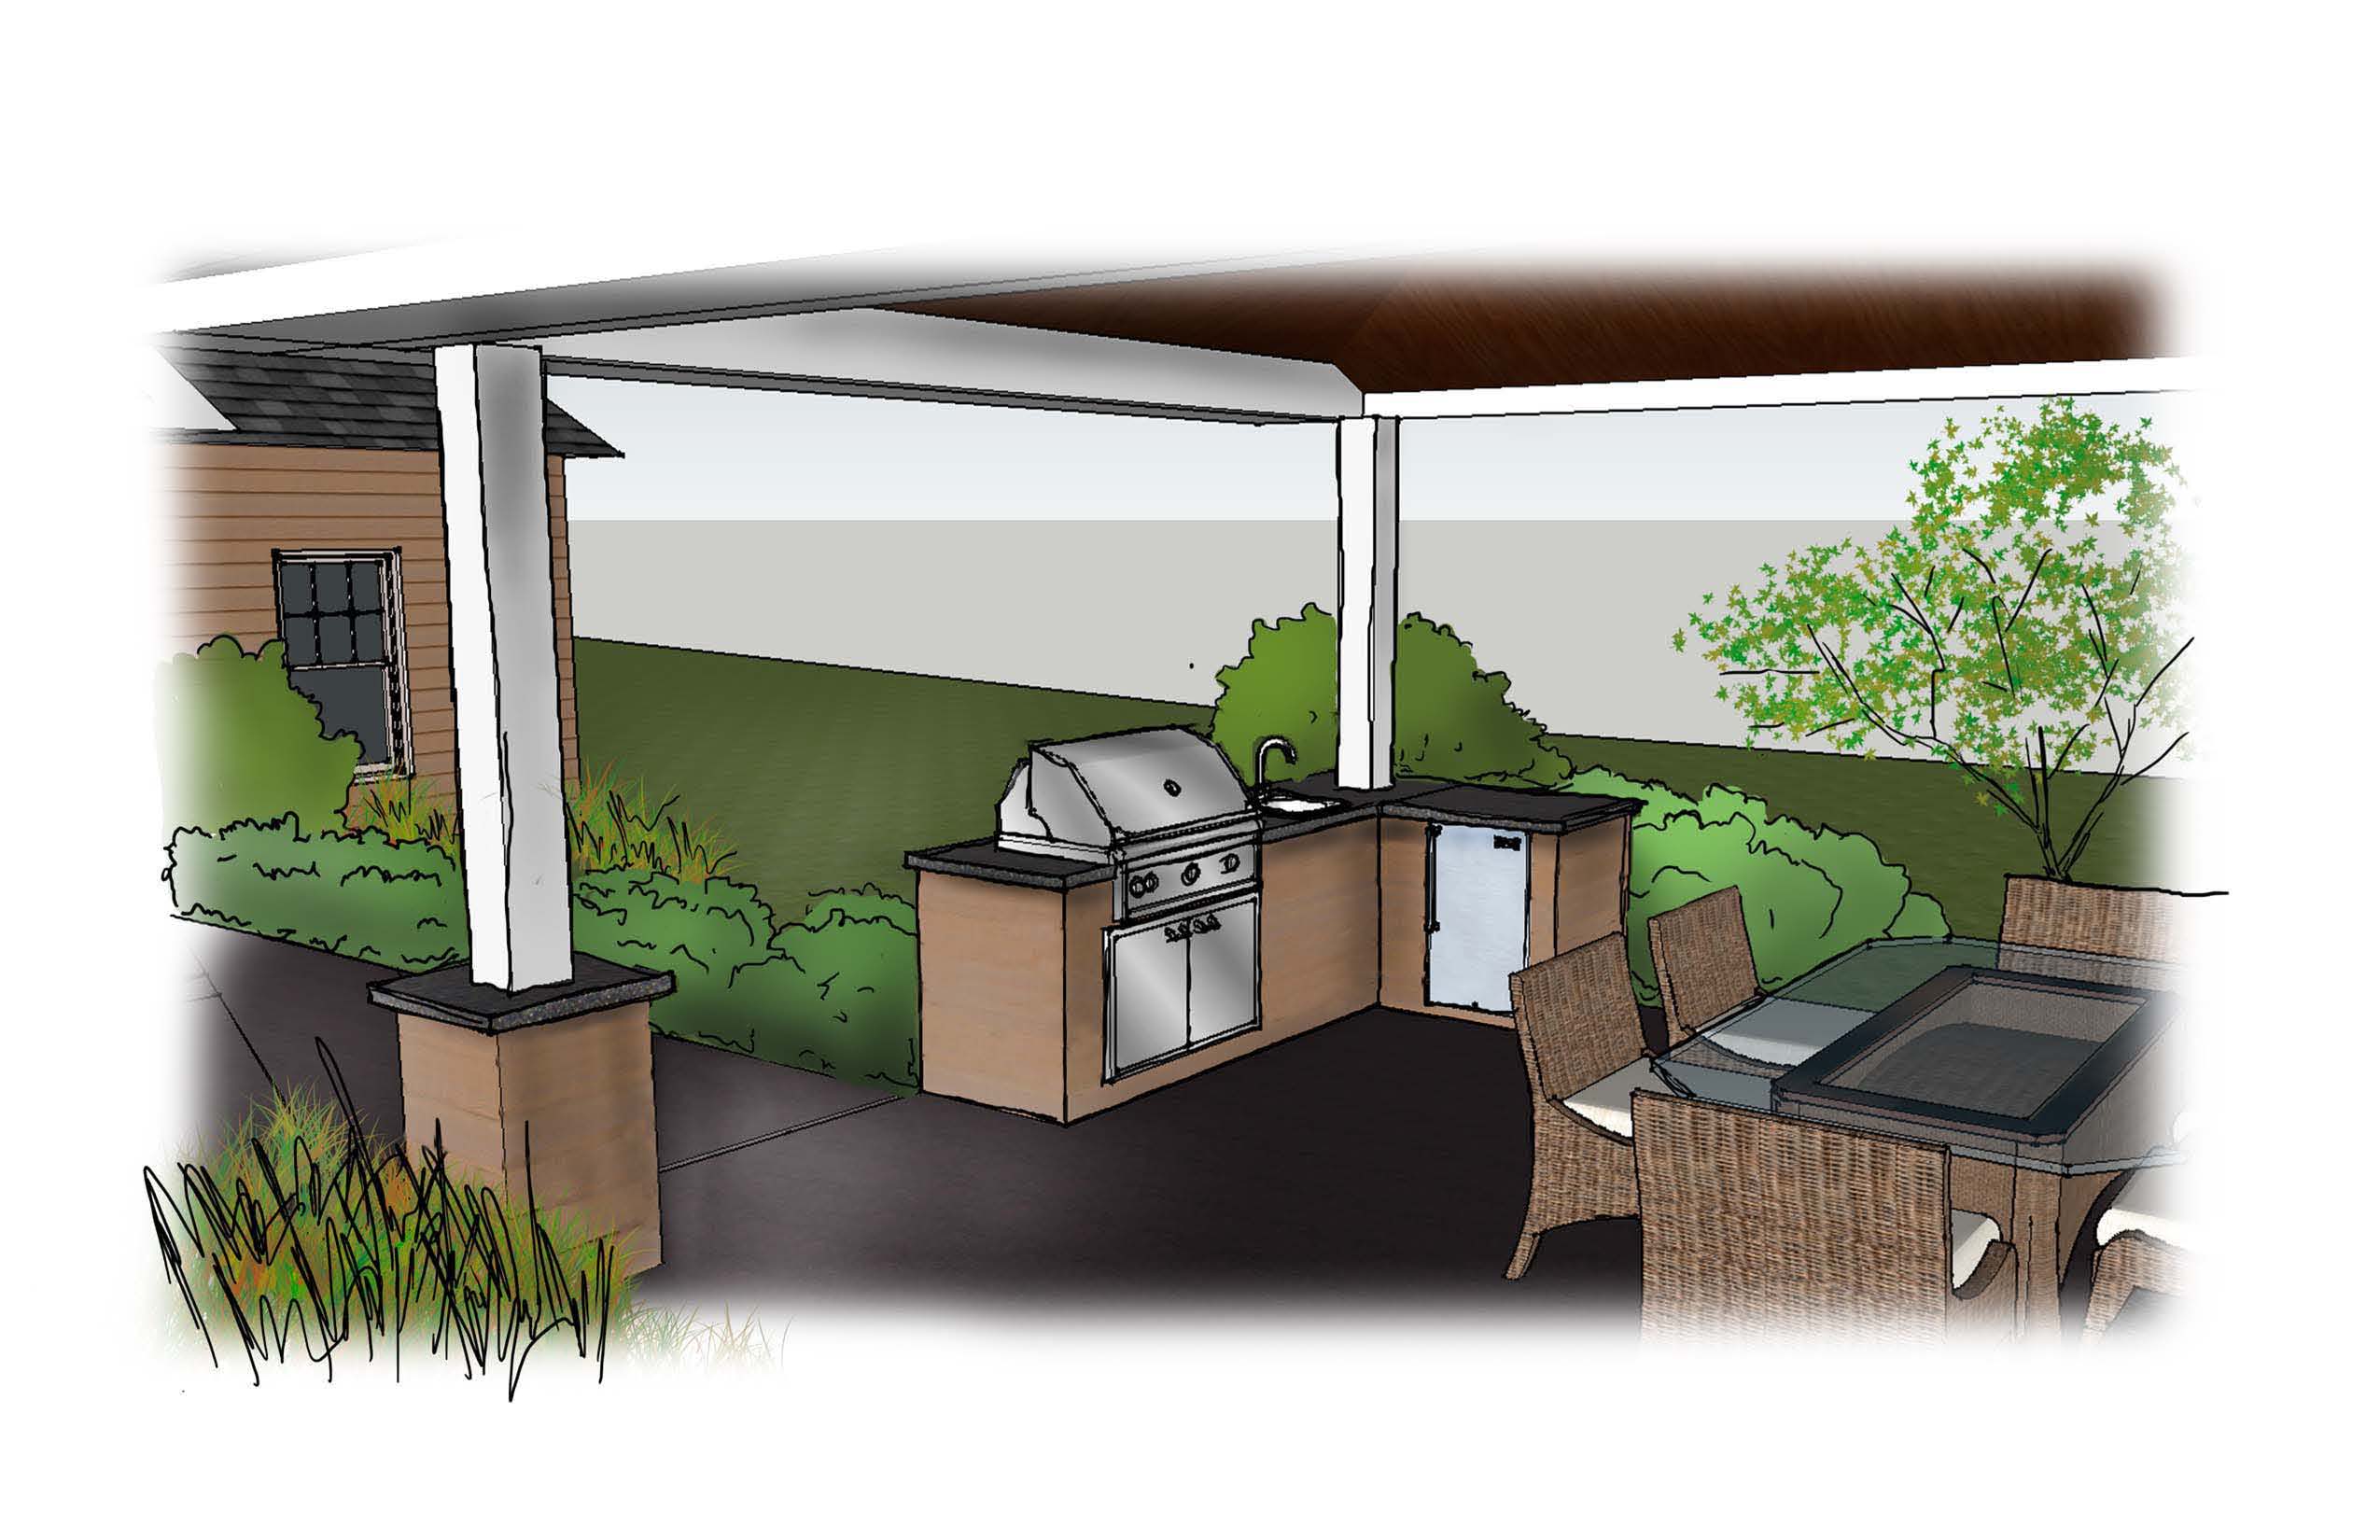 L shaped outdoor kitchen in a stucco finish